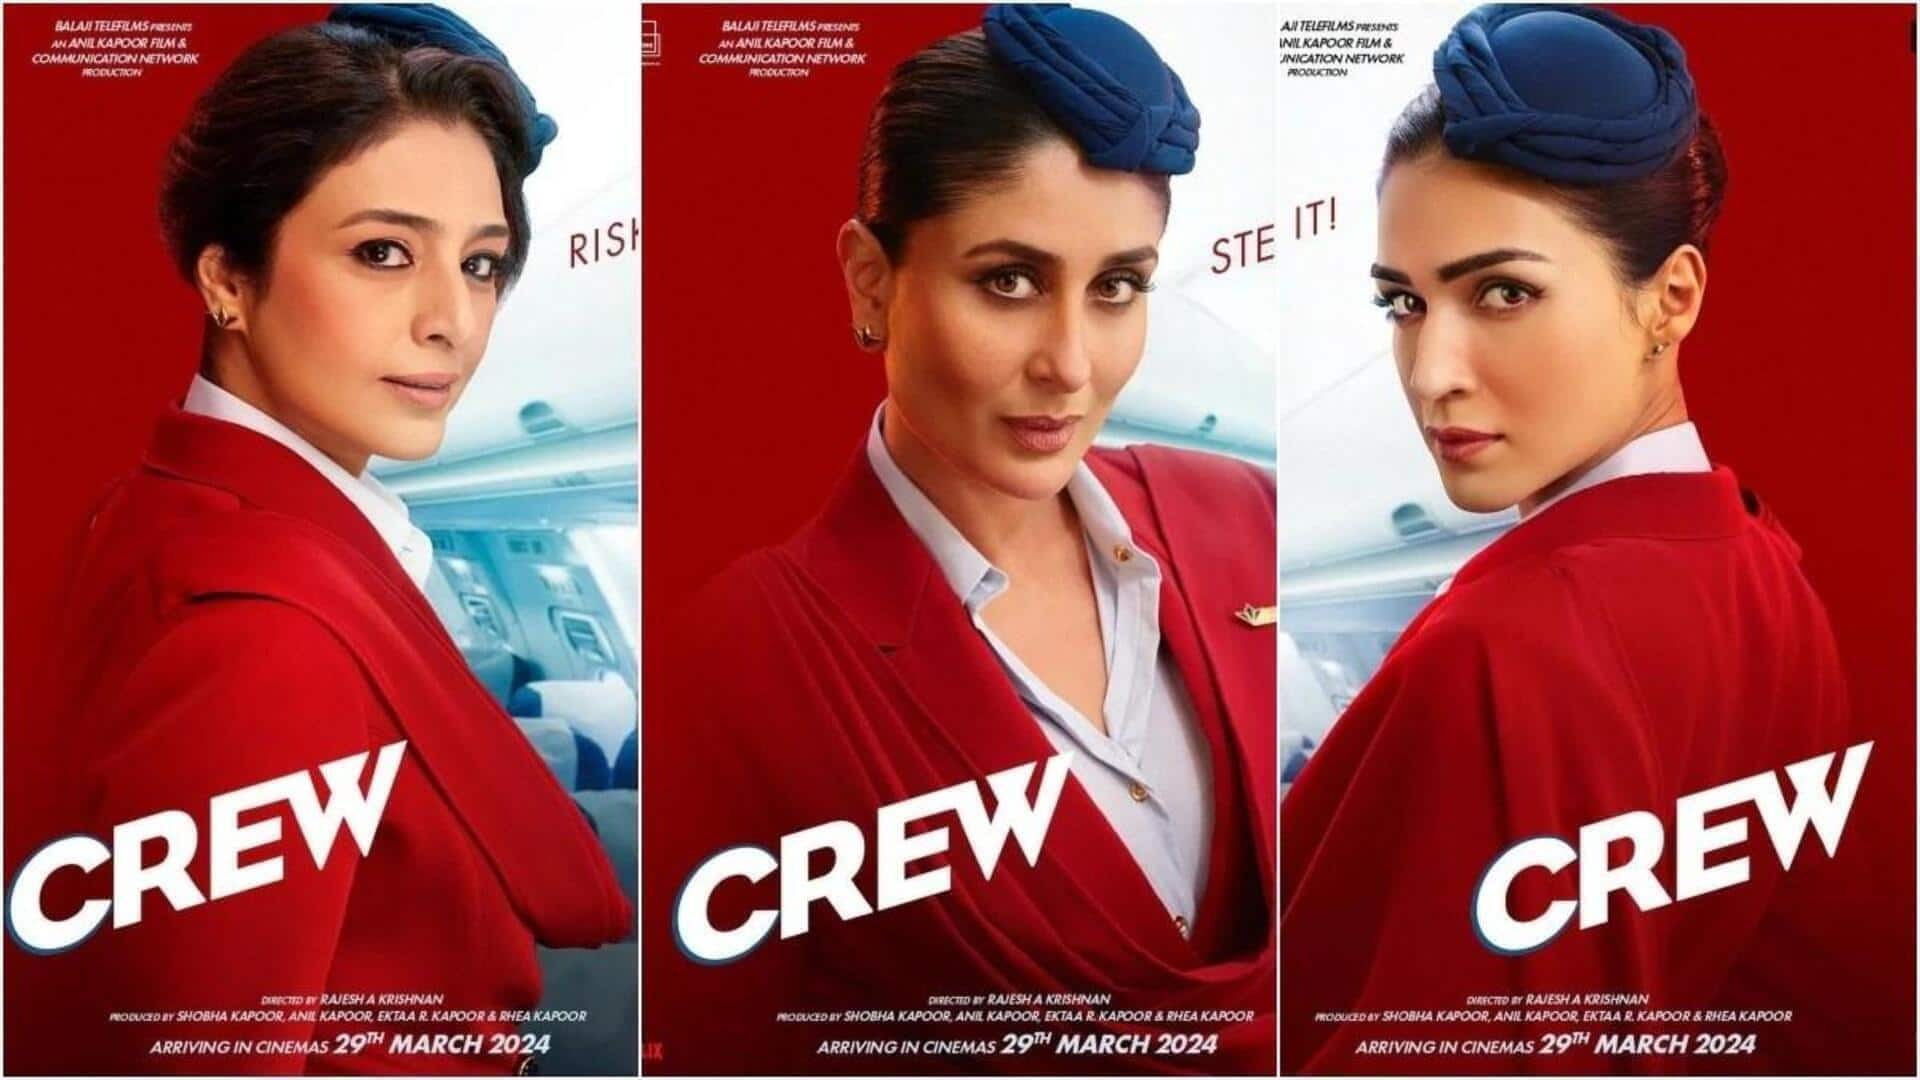 Censor Board suggests these revisions to Tabu's dialogues in 'Crew'